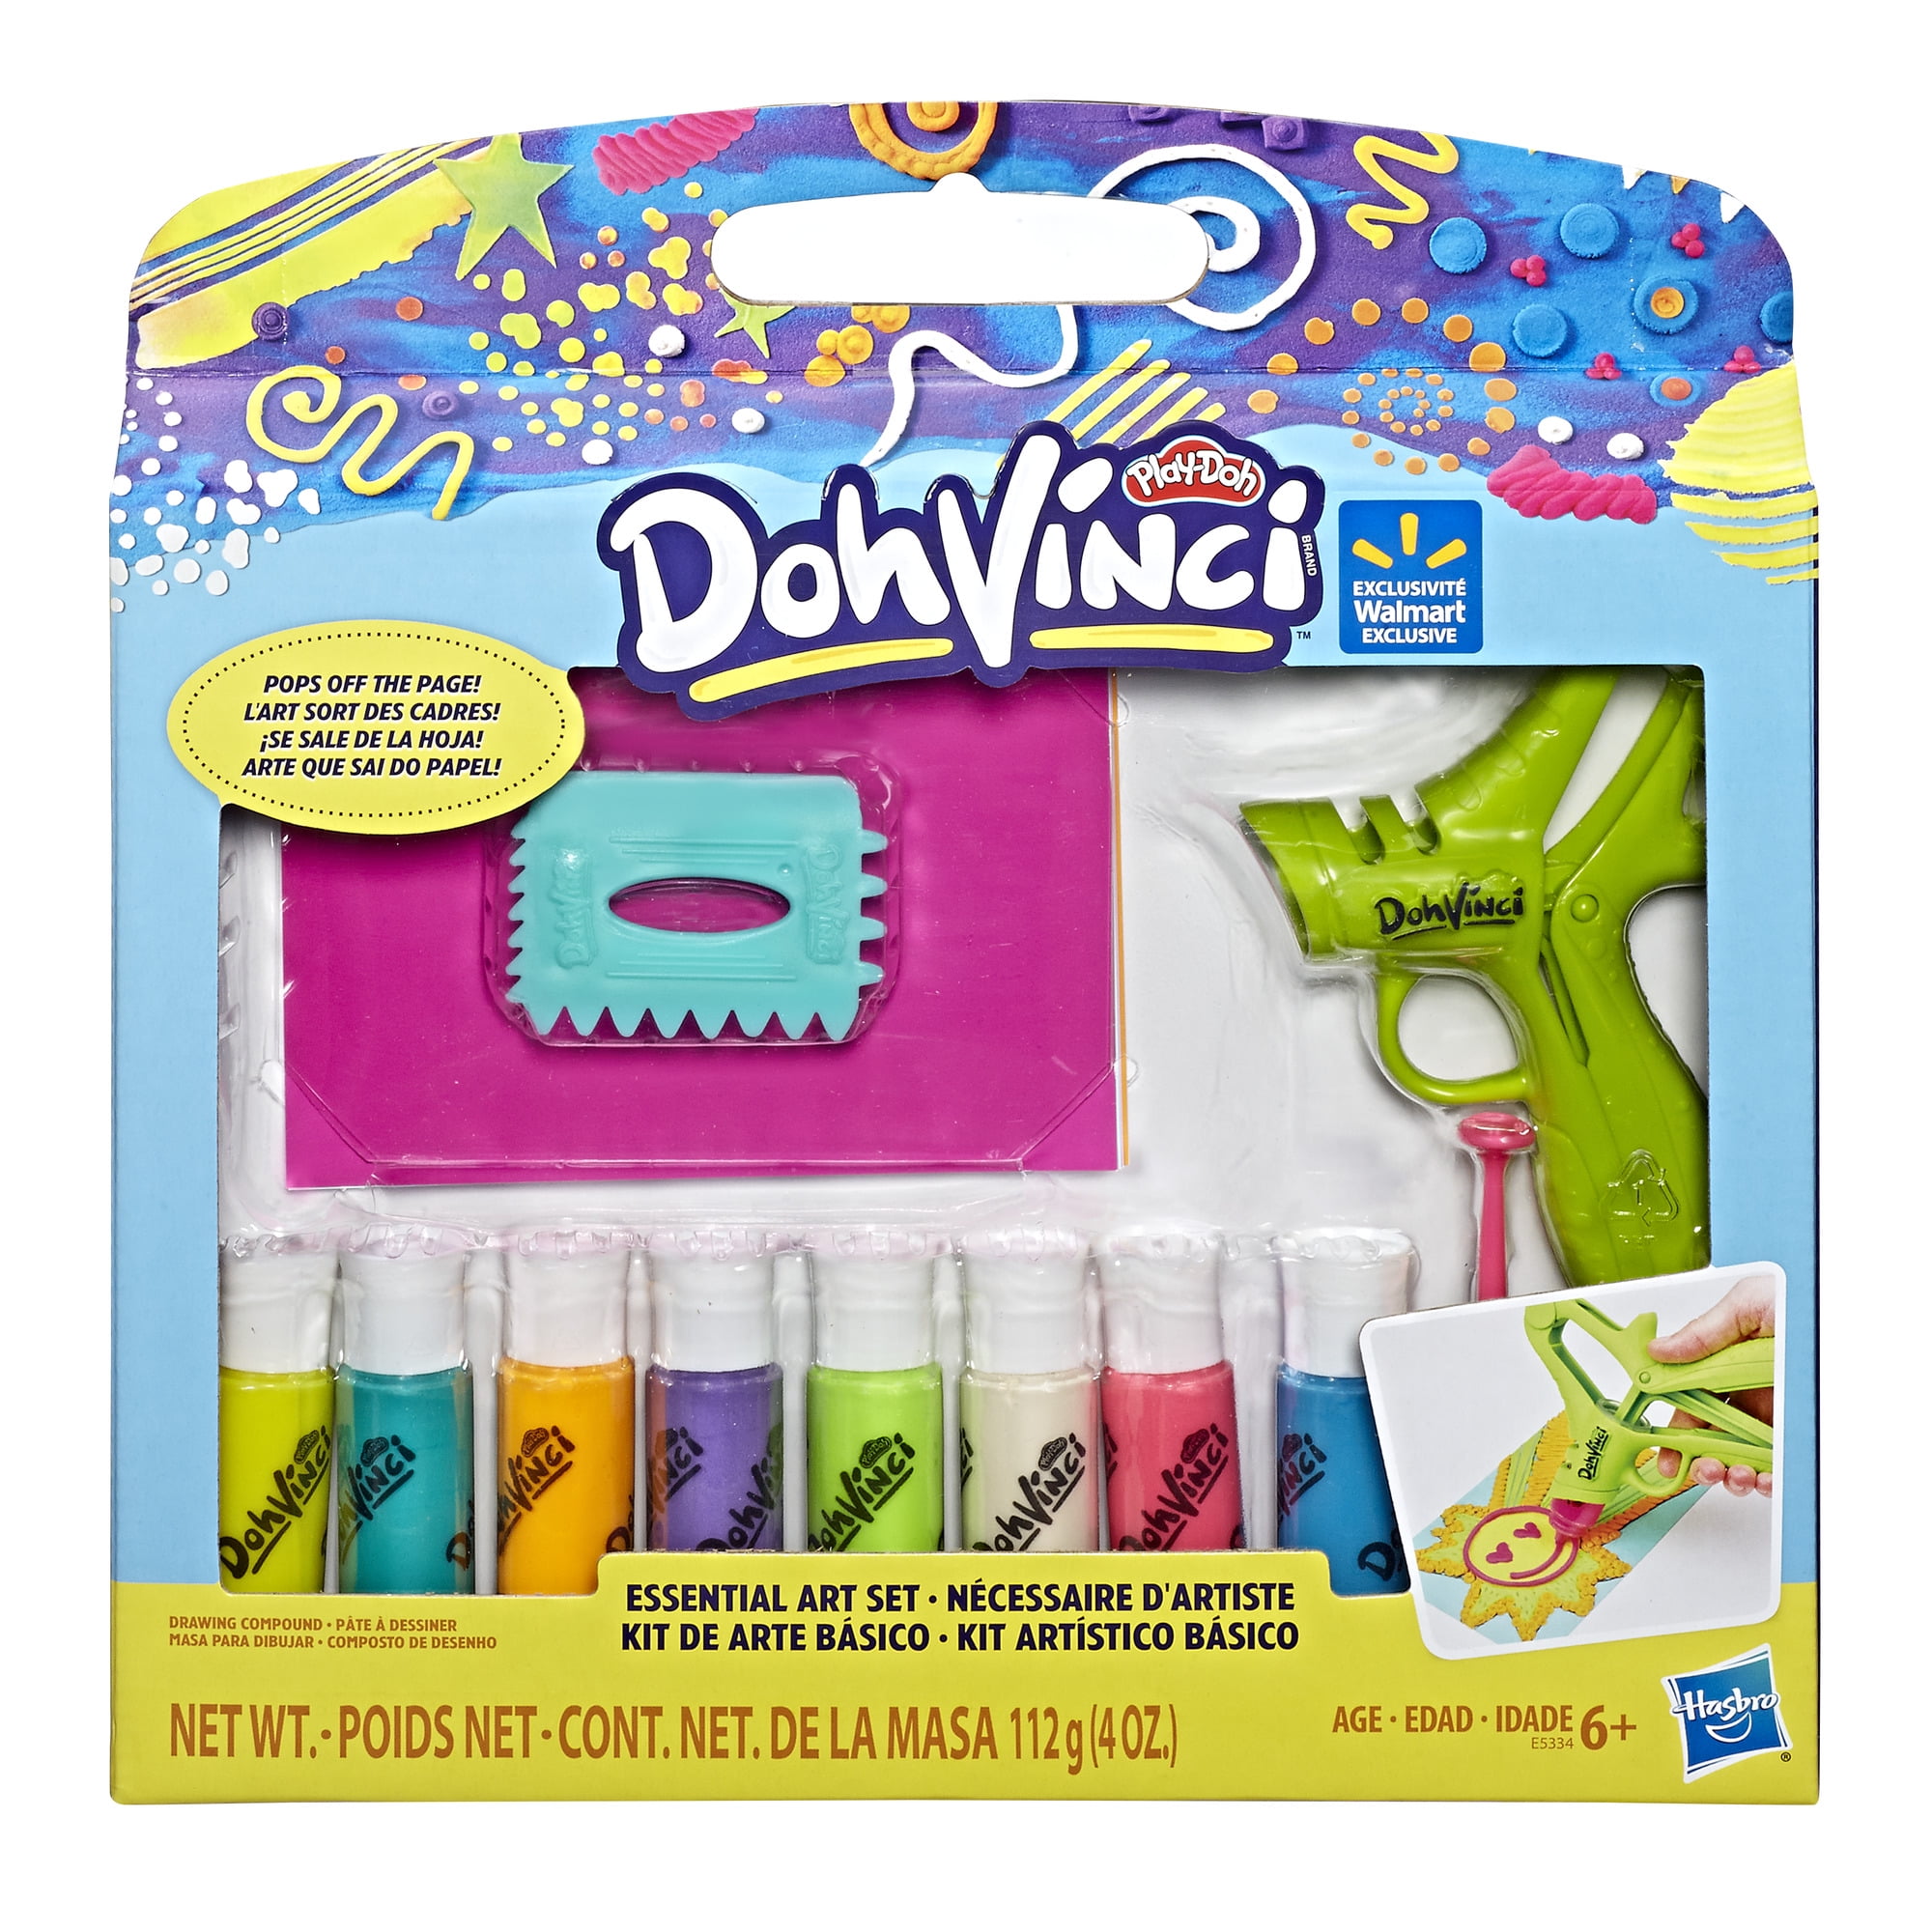 DohVinci Mix and Make Tools by Play-Doh BRAND B07BMHVK28 for sale online 